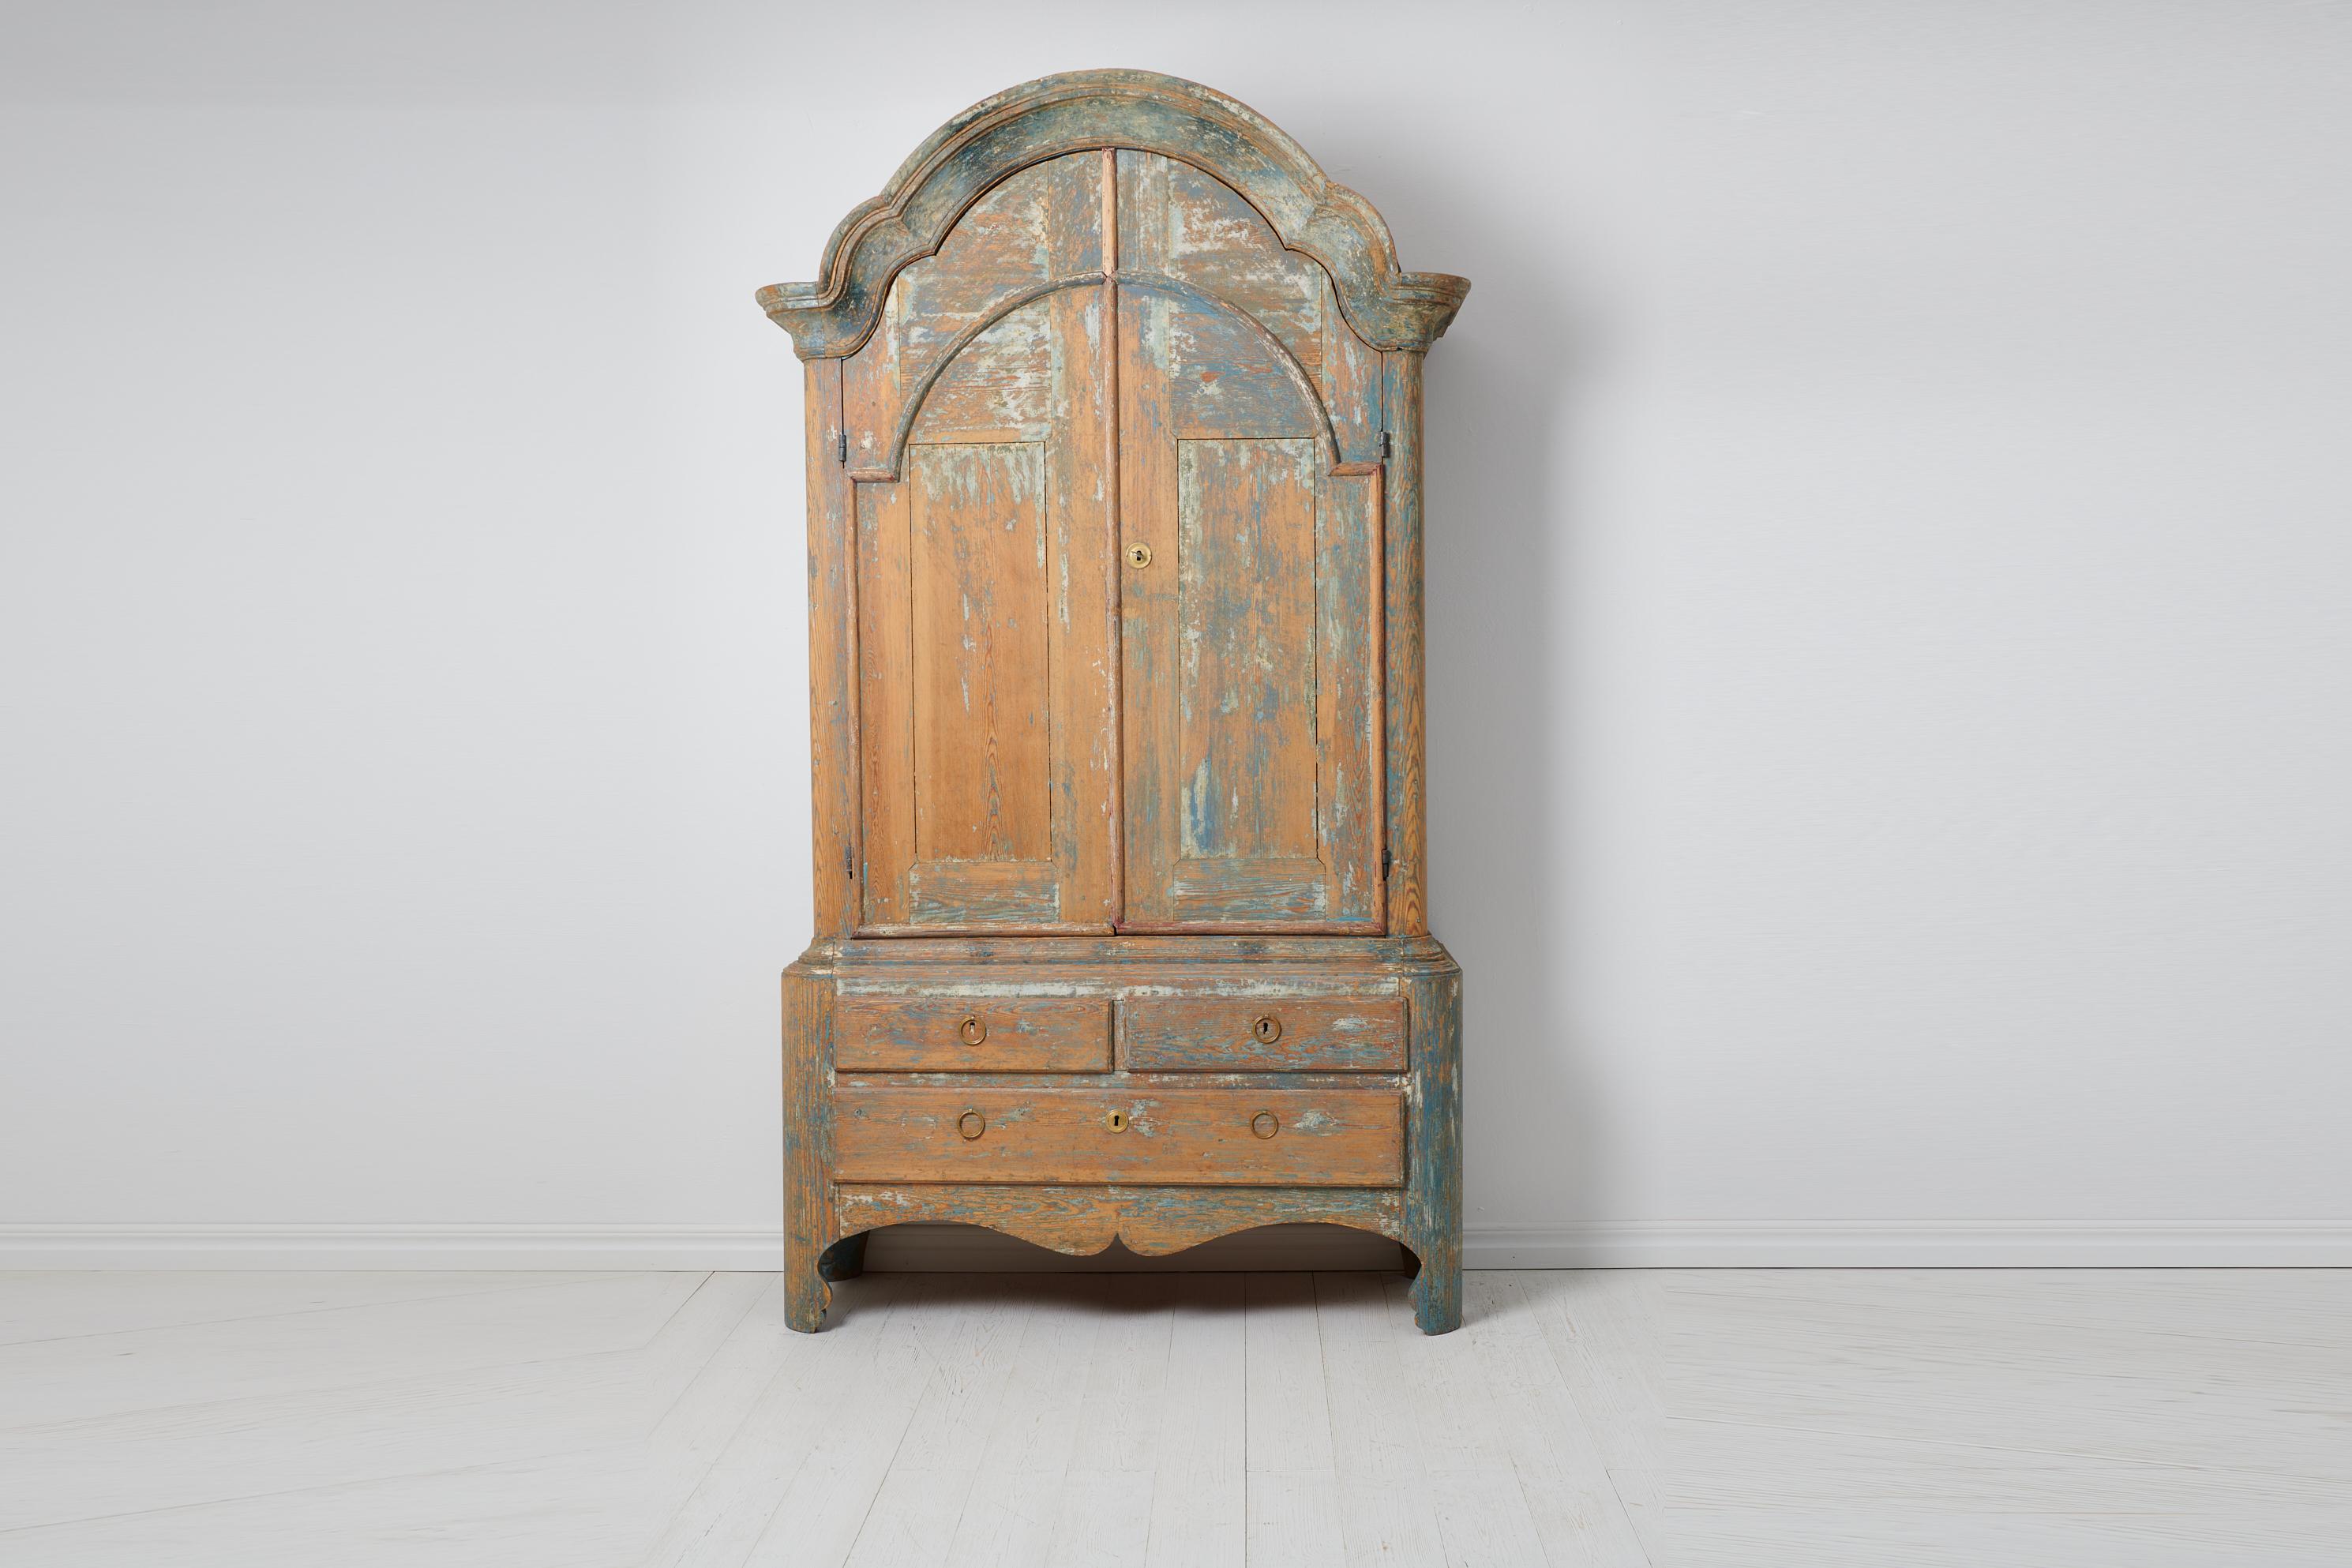 Rare large rococo cabinet from northern Sweden made during the last decades of the 18th century, around 1780 to 1790. The cabinet is made in Swedish pine in two parts with traces of the original blue paint. The paint has significant distress. The